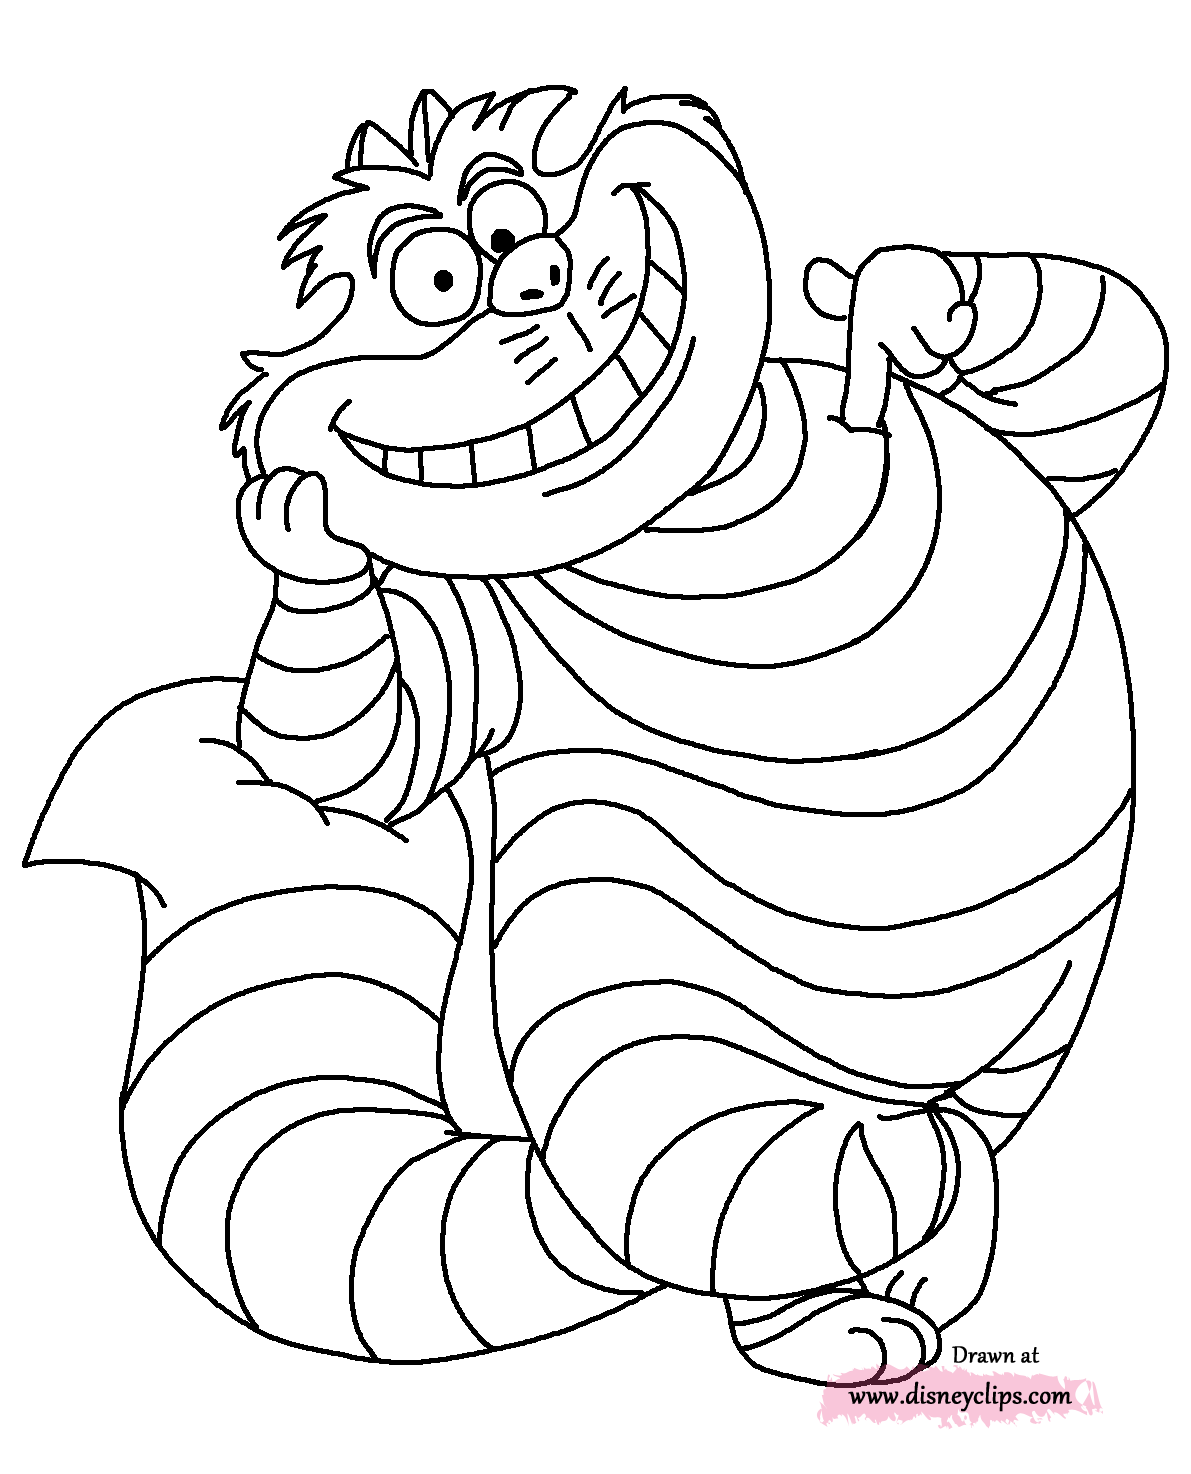 Cheshire Cat Coloring Pages - Coloring Home